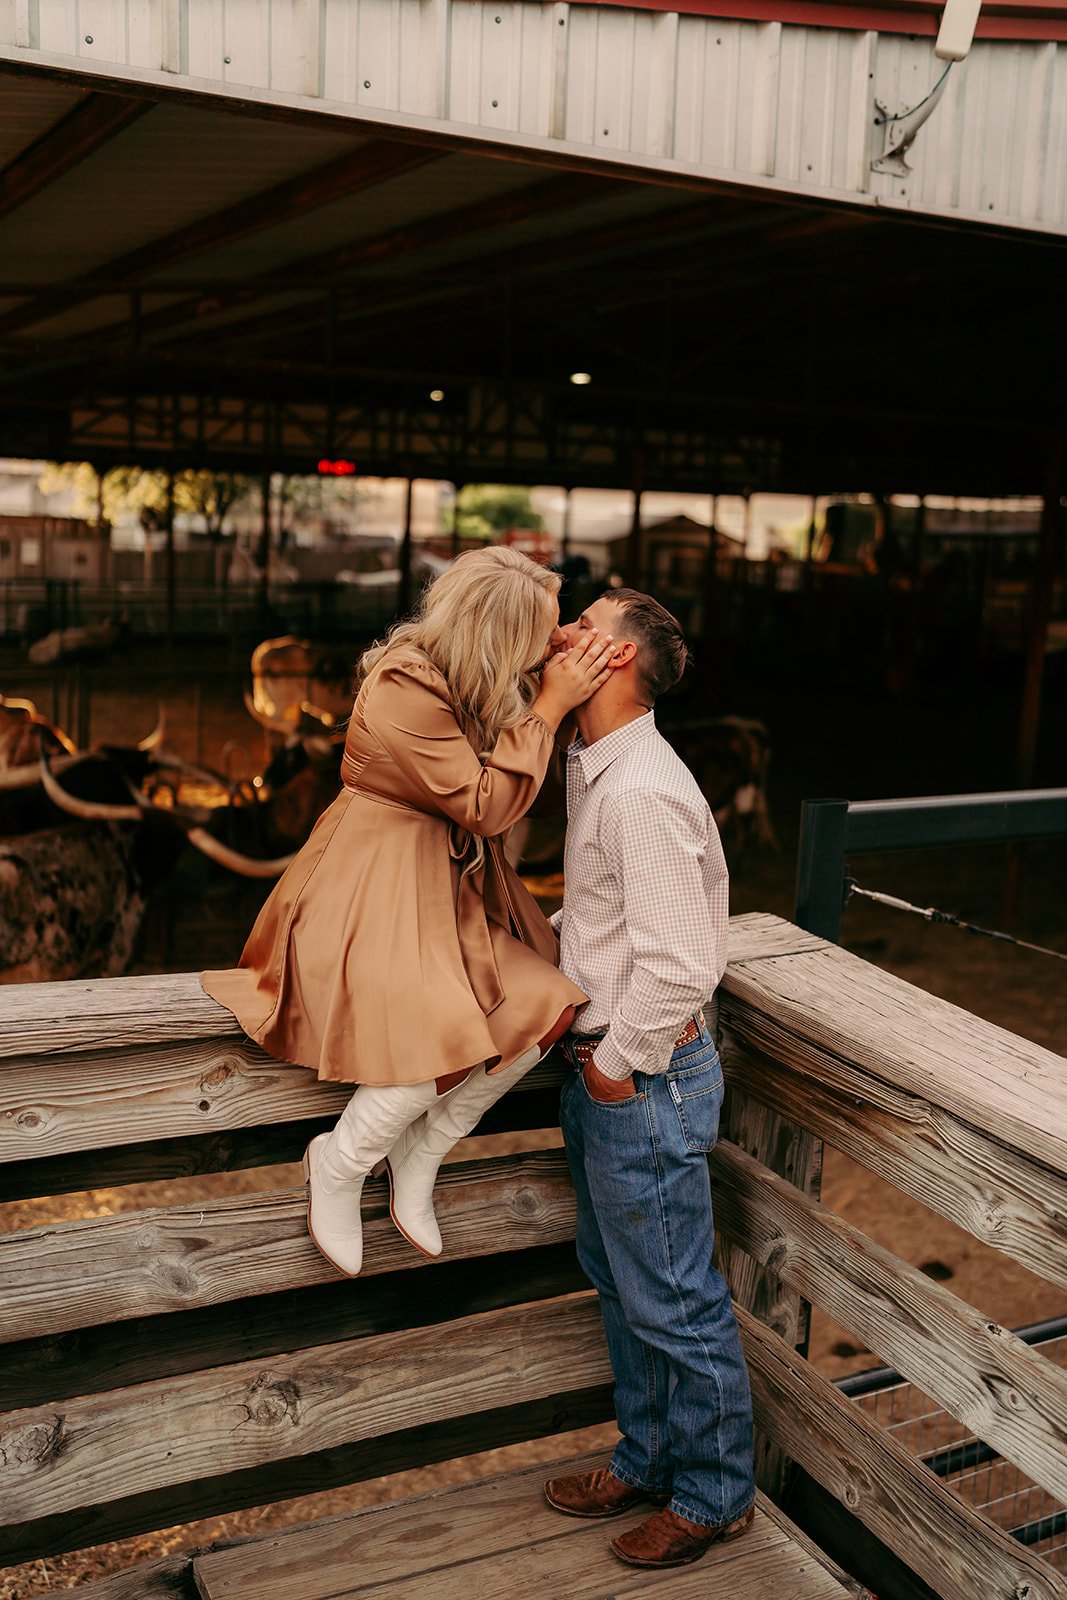 Western Themed Engagement Session at The Fort Worth Stockyards